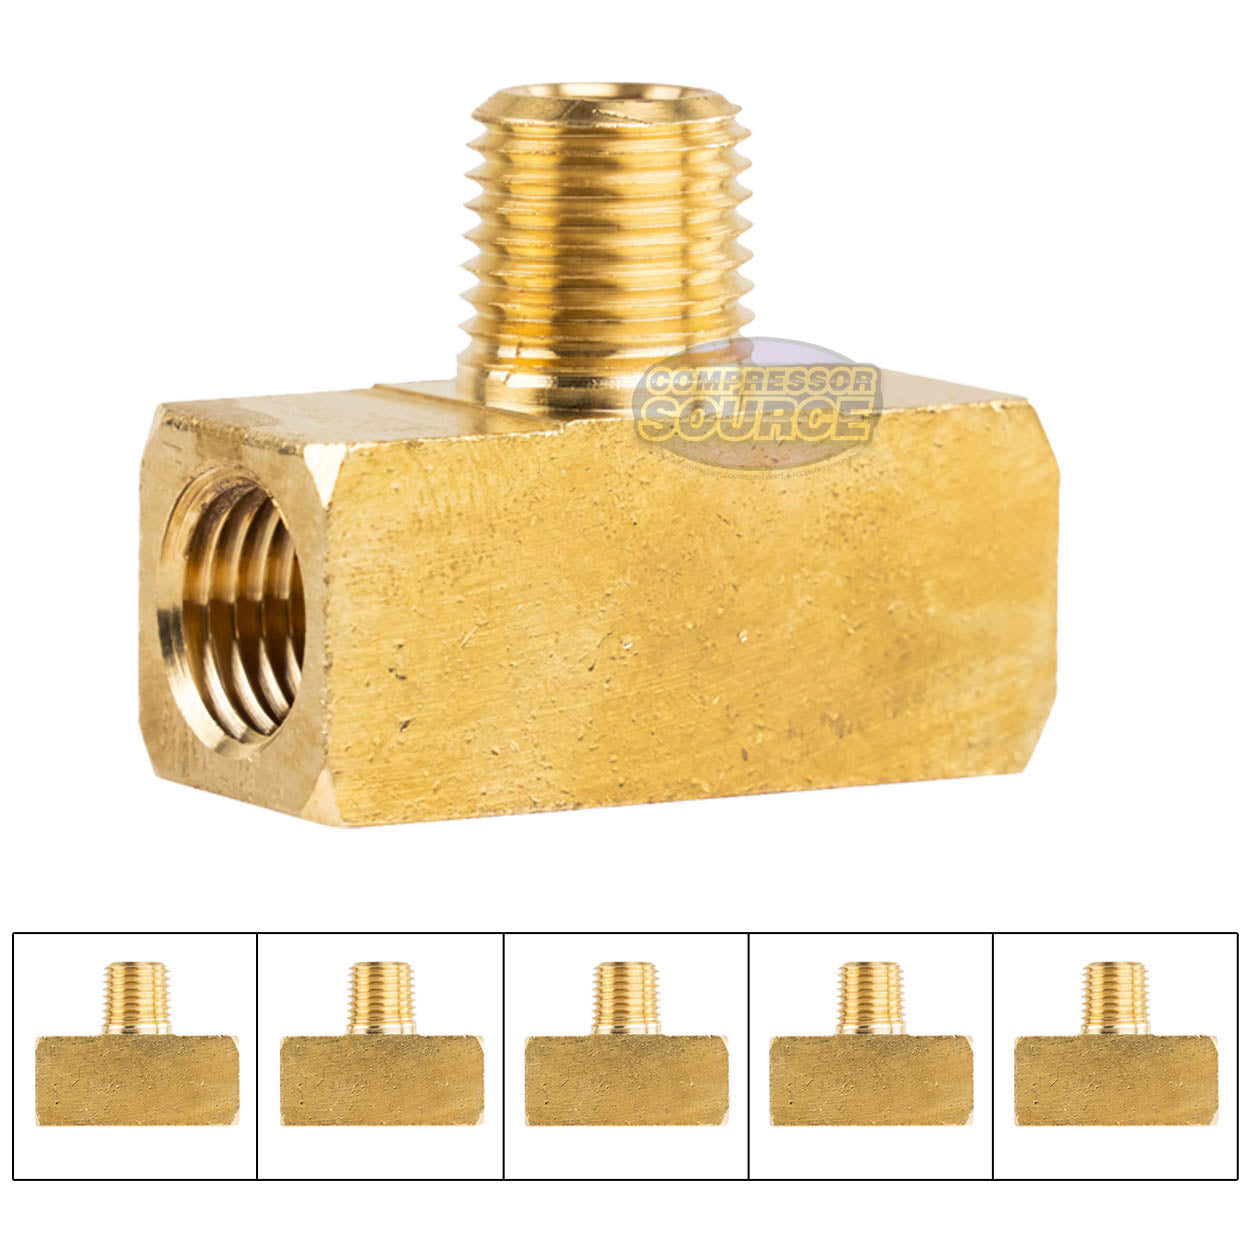 5 Pack 1/4" Male NPT x (2) 1/4" Female NPT Branch Tee Brass Union Tee Pipe Connector